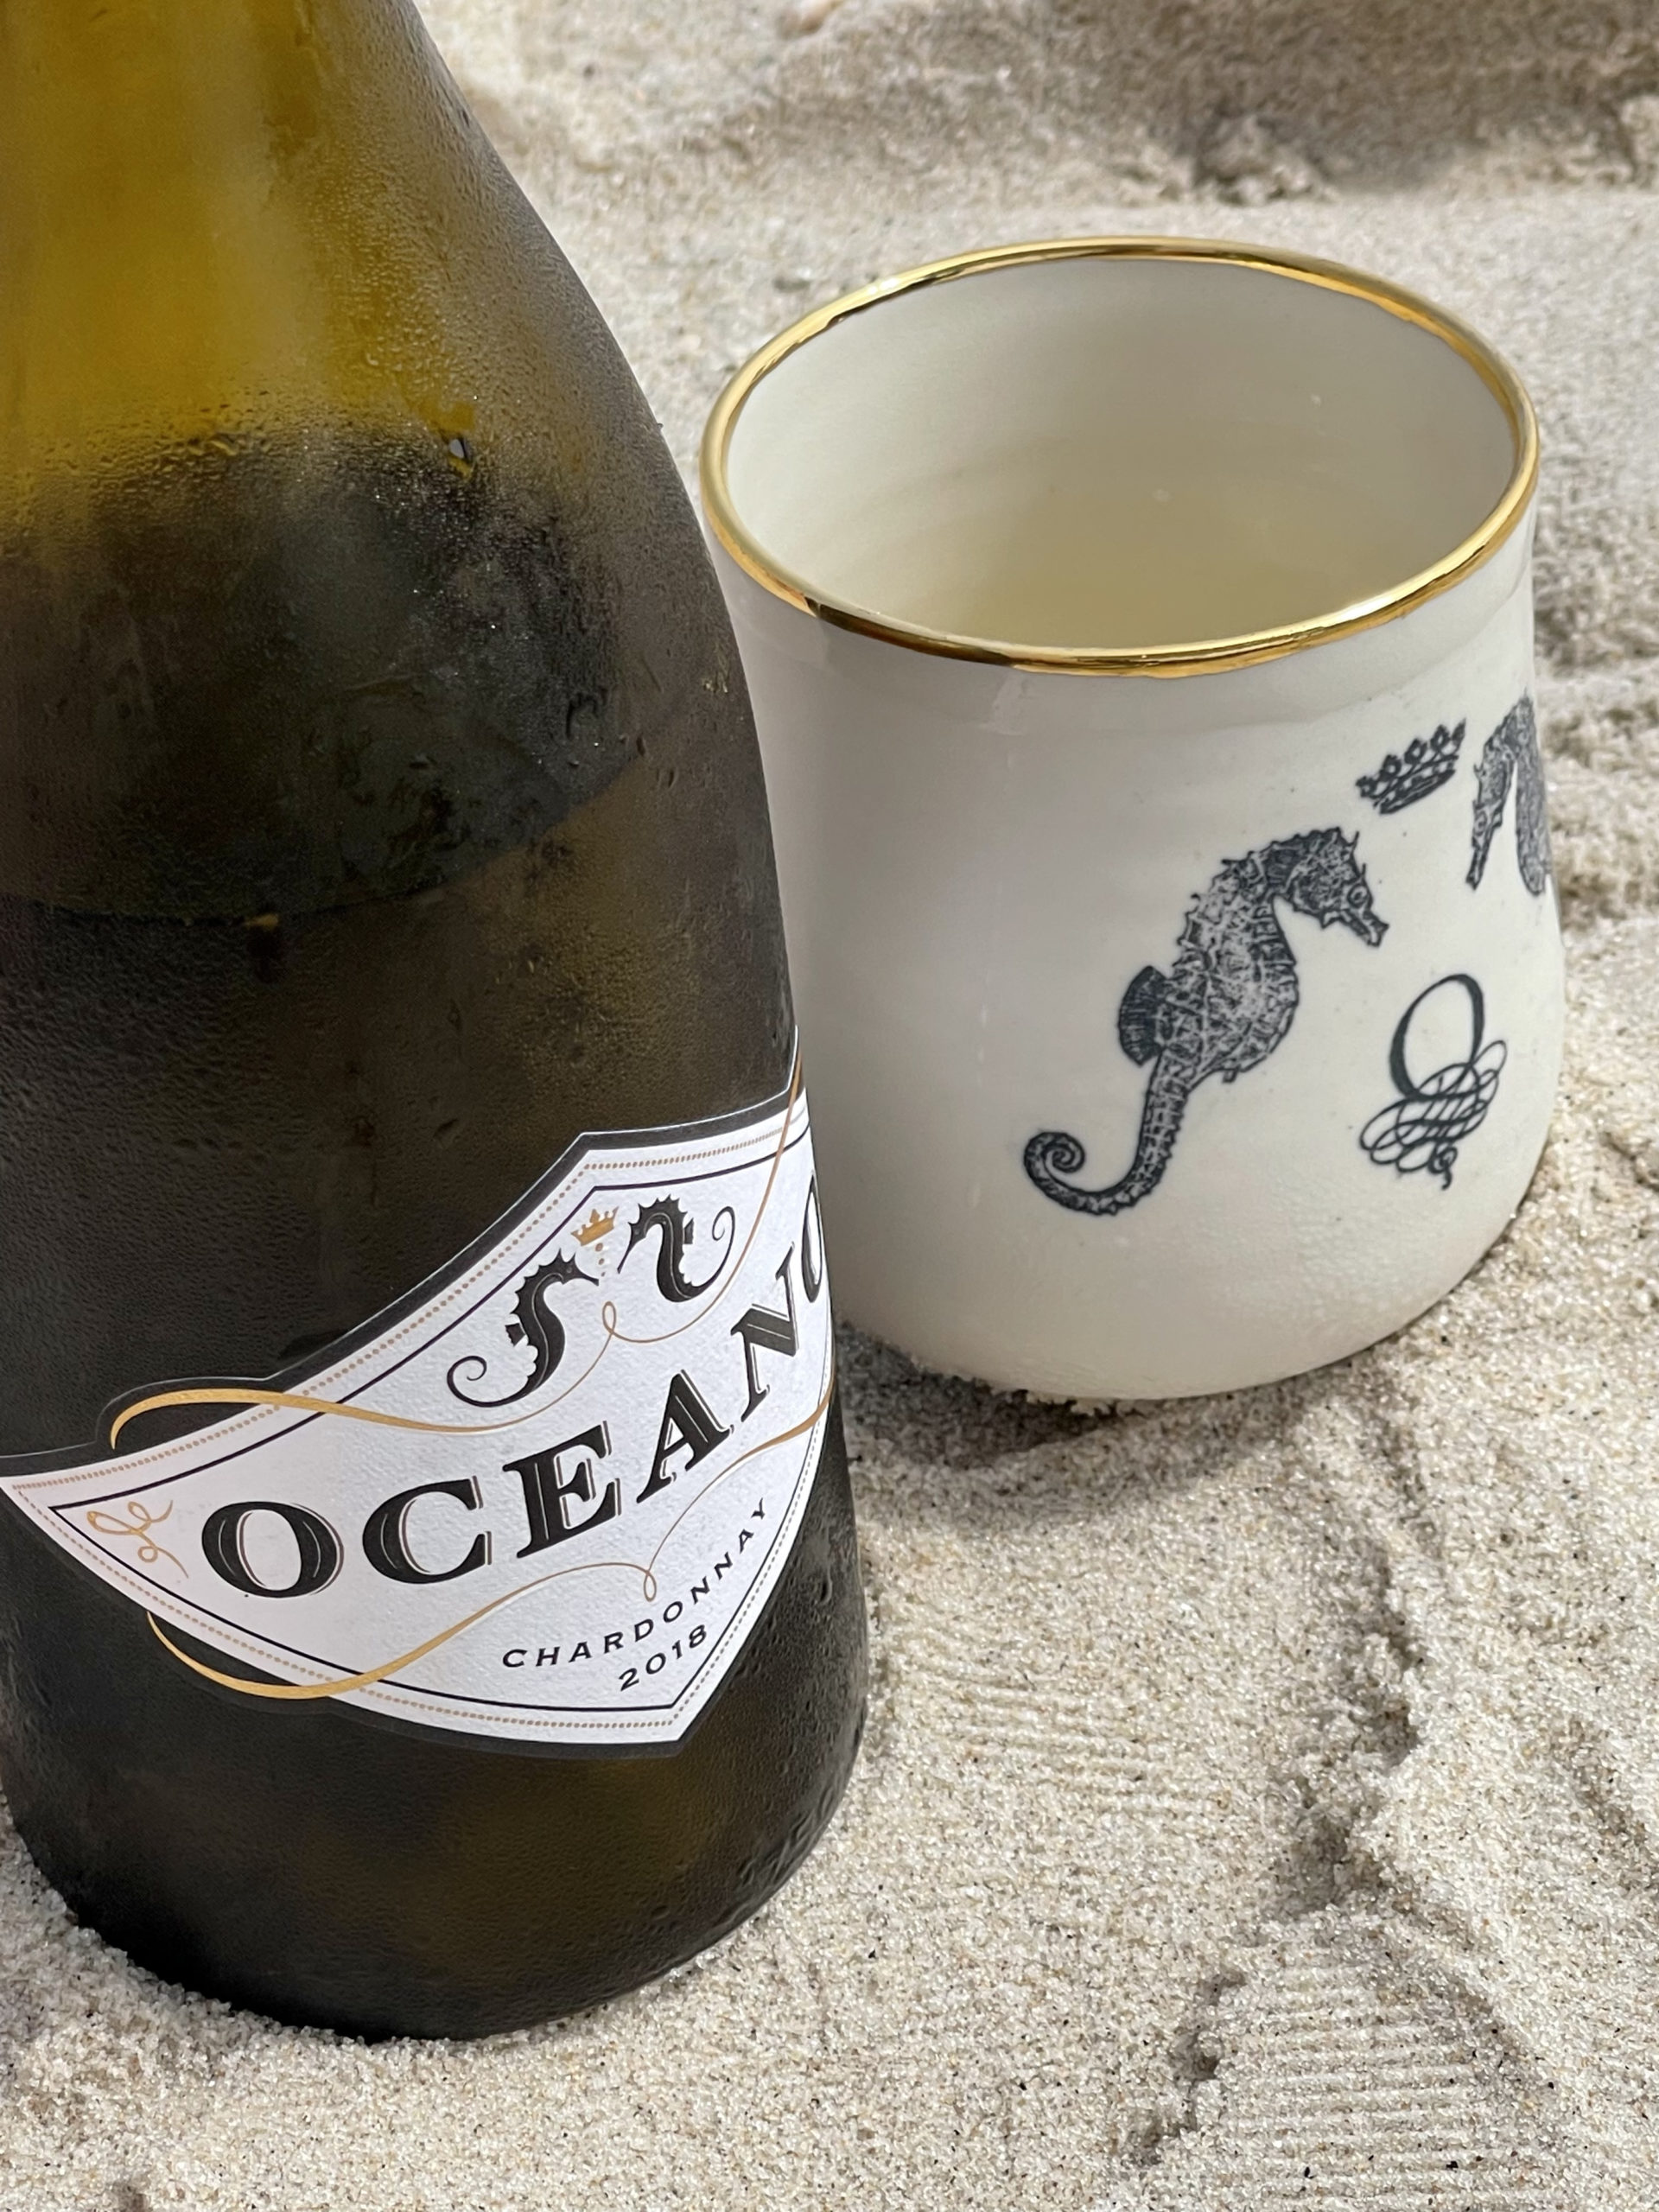 Oceano Wine Chardonnay bottle and Oceano Wine goblet placed on sand